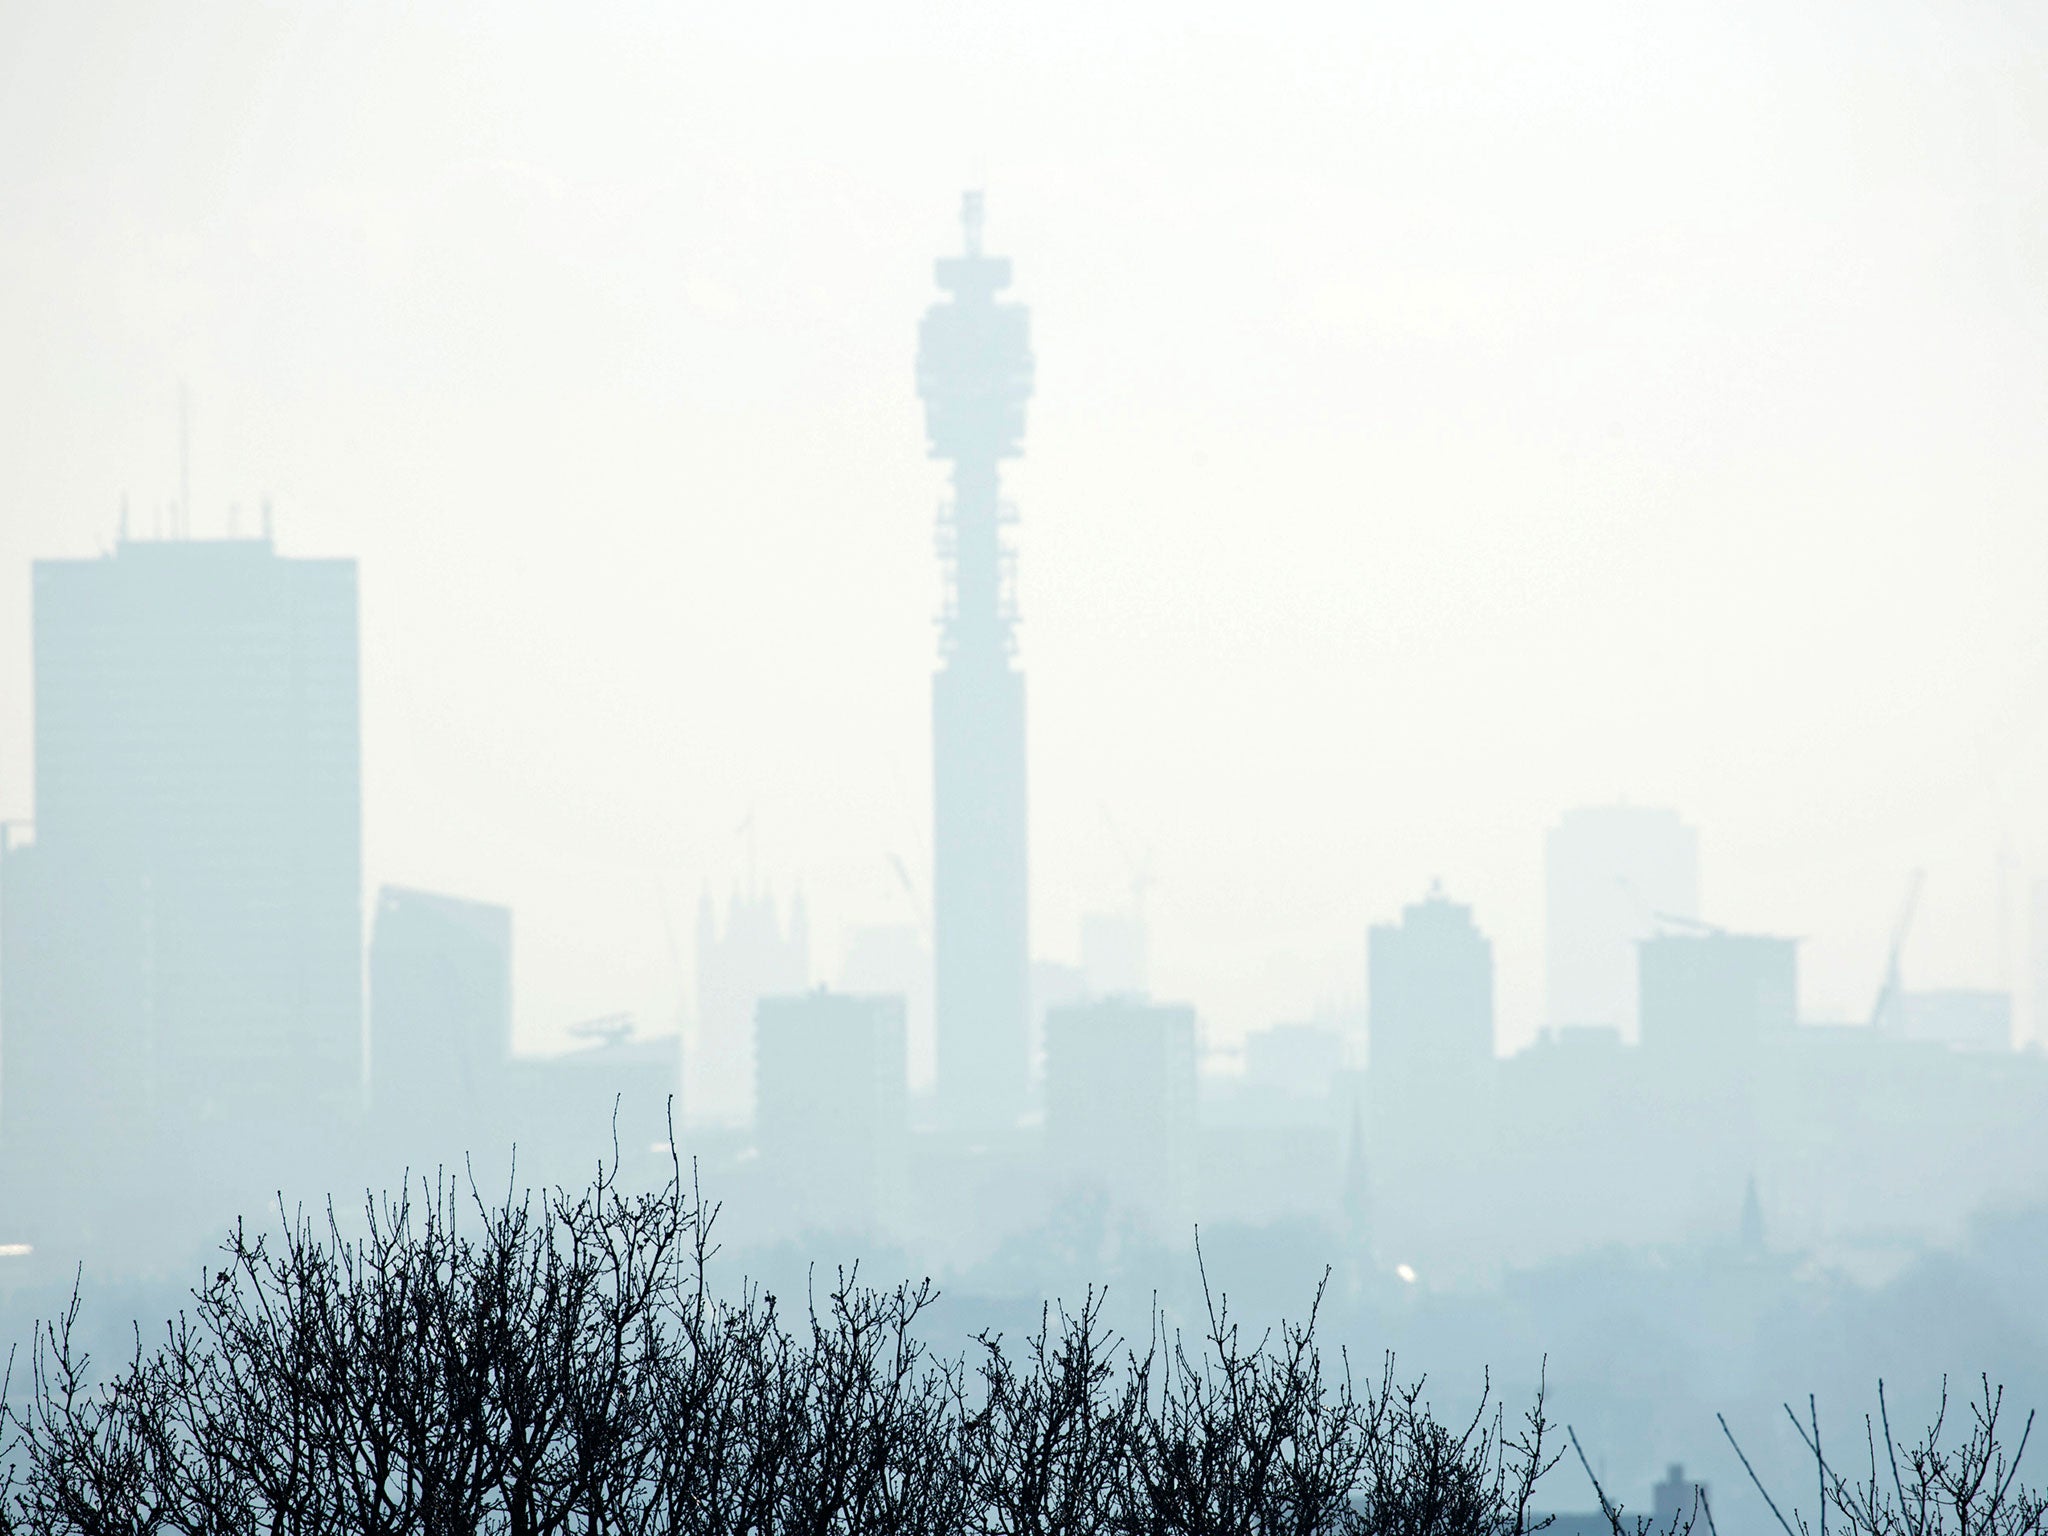 Earlier this year air pollution in London was worse than in Beijing